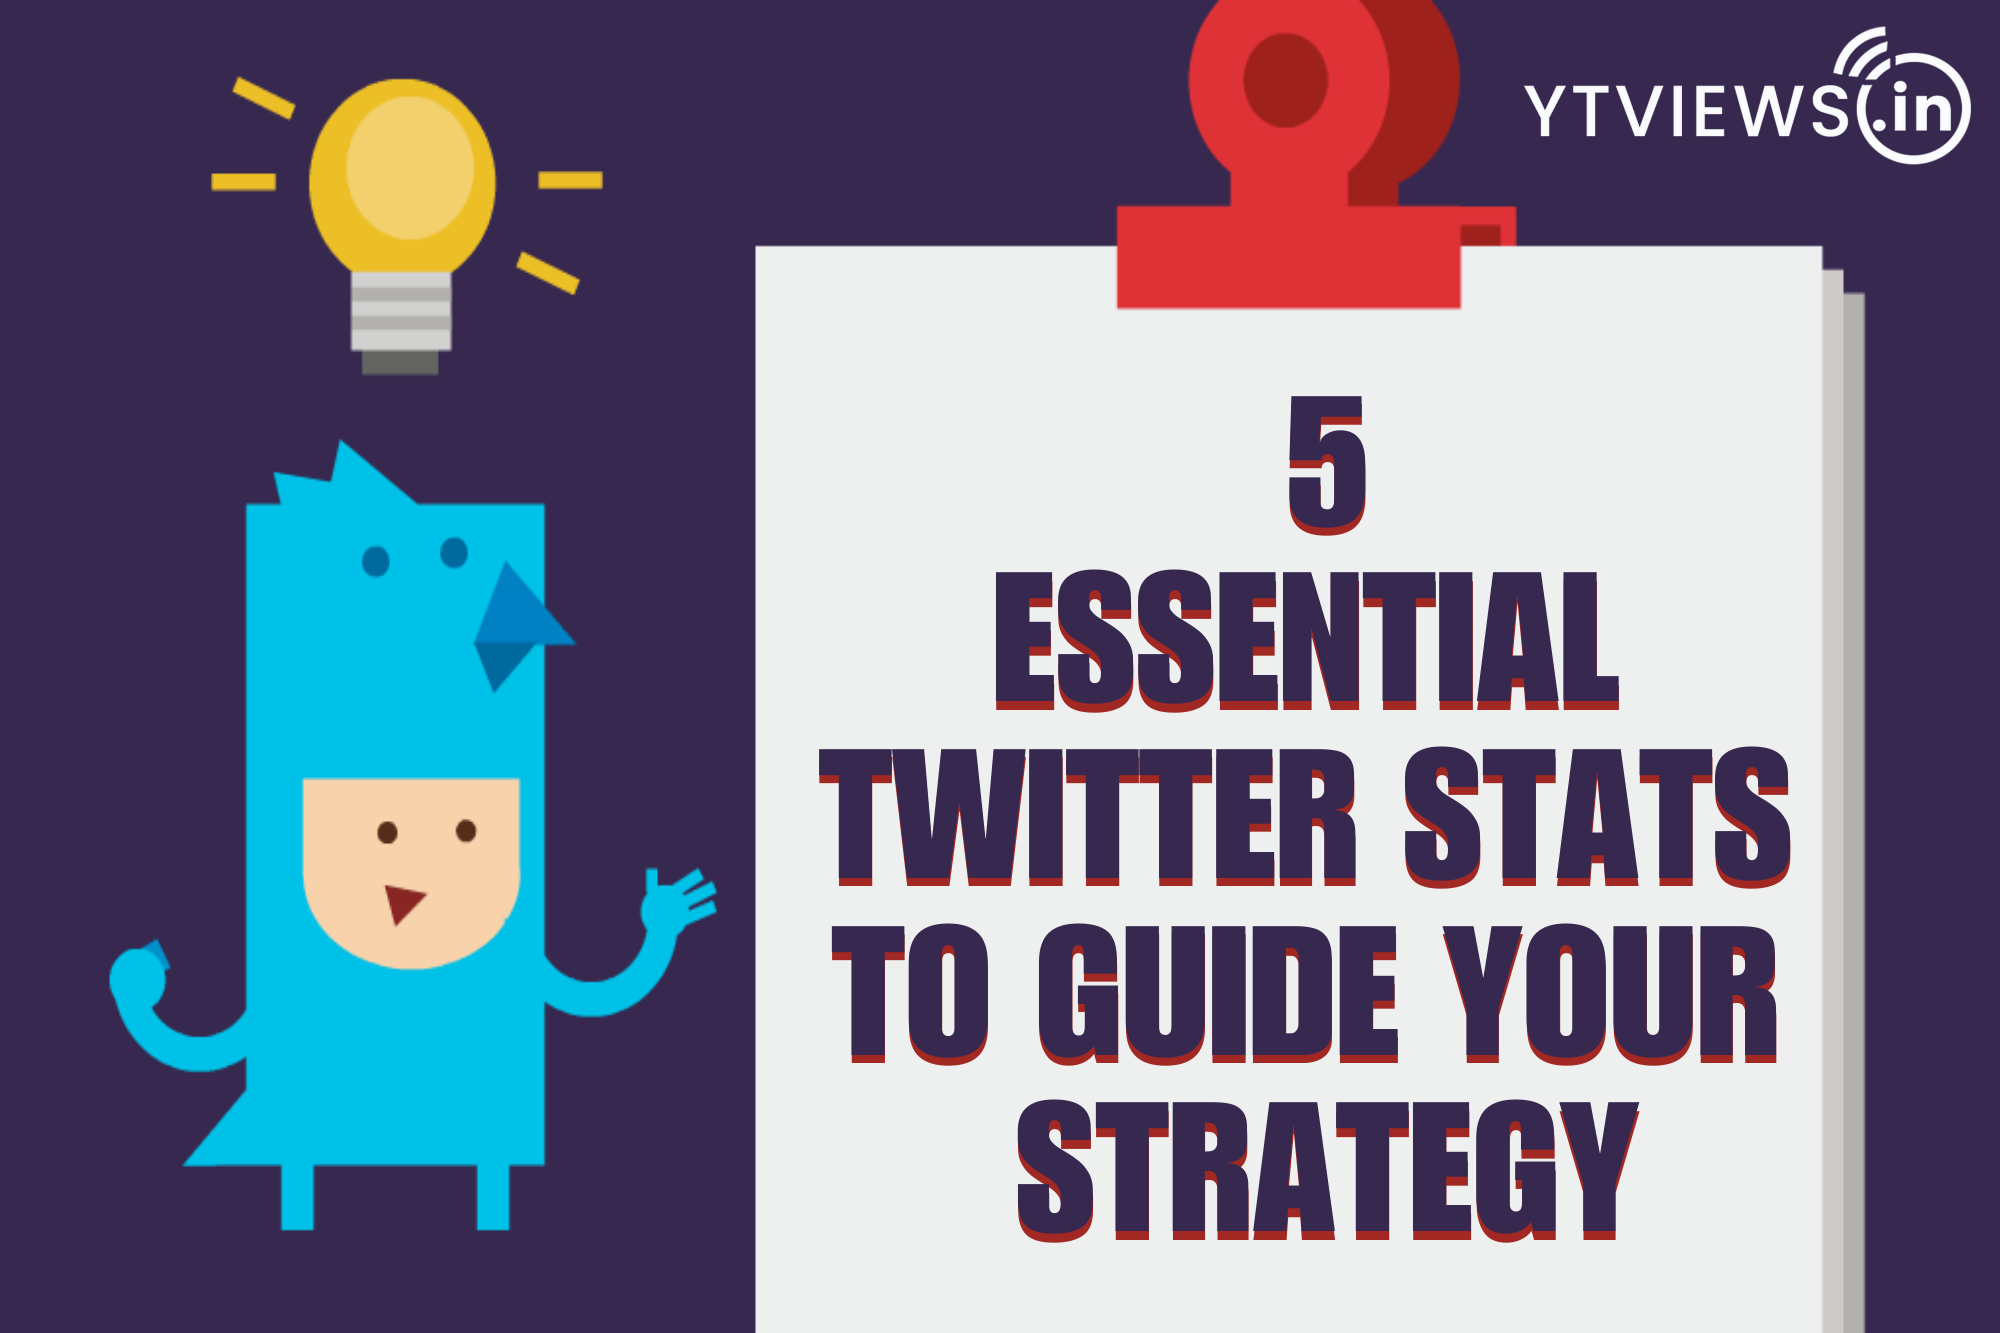 5 essential Twitter stats to guide your strategy